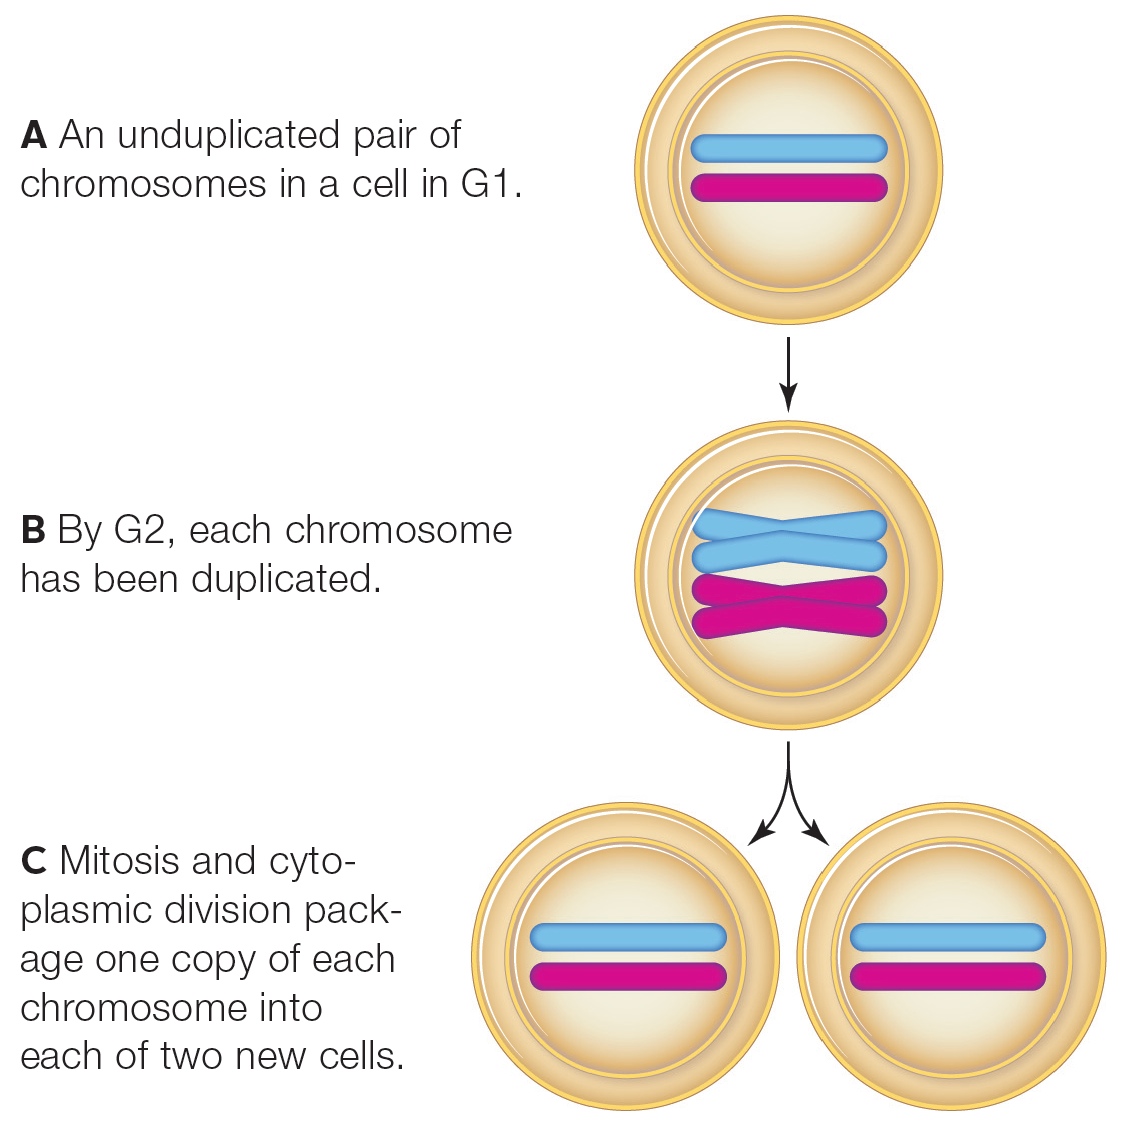 How mitosis maintains the chromosome number.